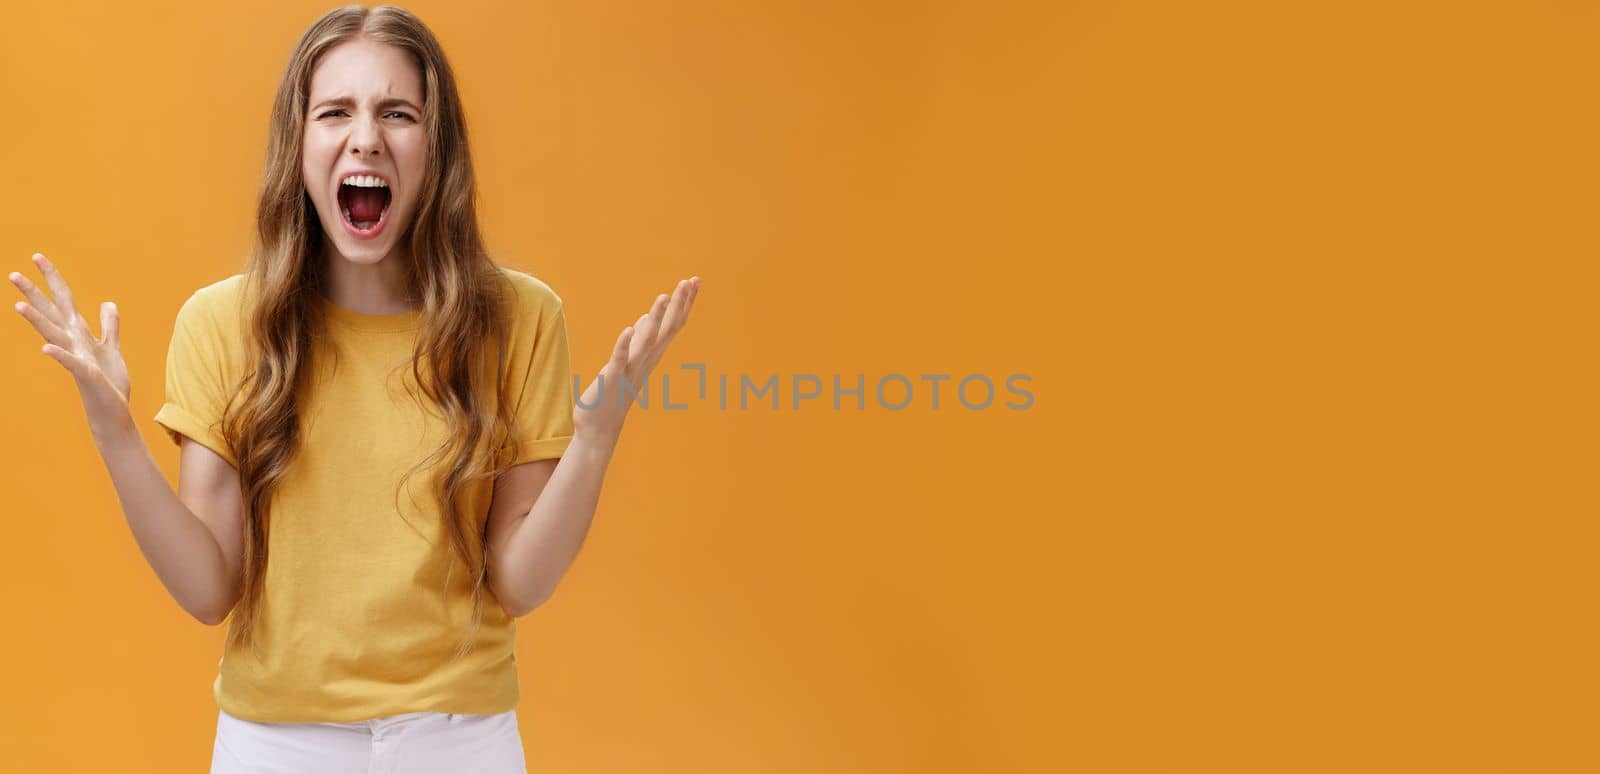 Studio shot of young woman during argument losing temper standing pressured and pissed yelling out loud from hate and anger gesturing with raised palms making furious face posing against orange wall by Benzoix